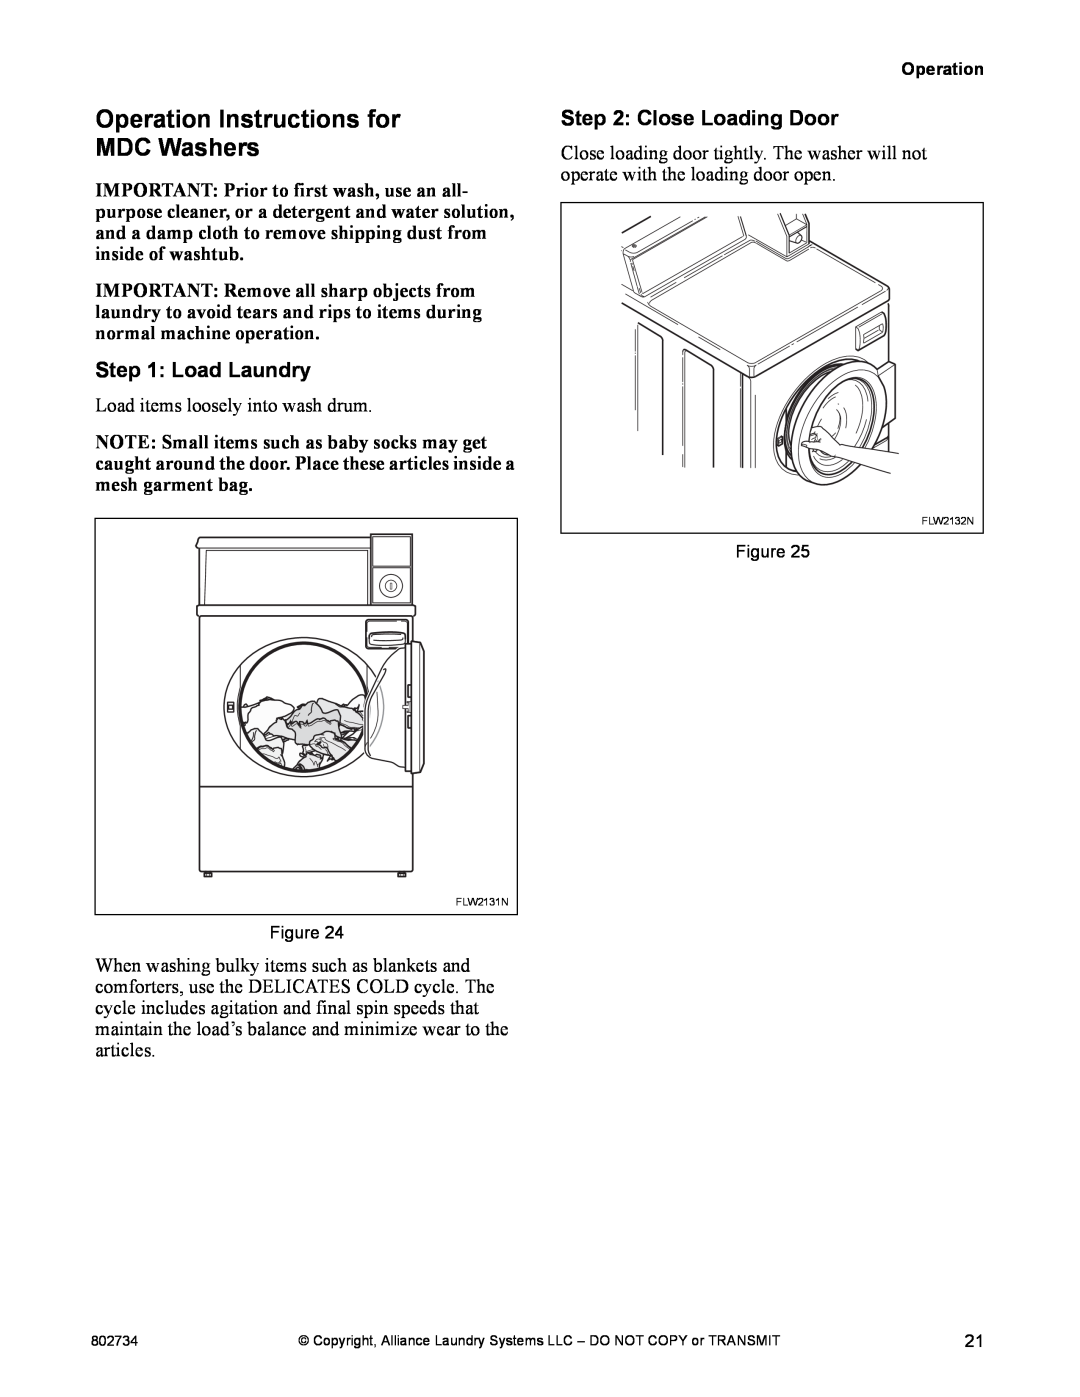 Alliance Laundry Systems FLW1526C manual Operation Instructions for MDC Washers, Load Laundry, Close Loading Door 